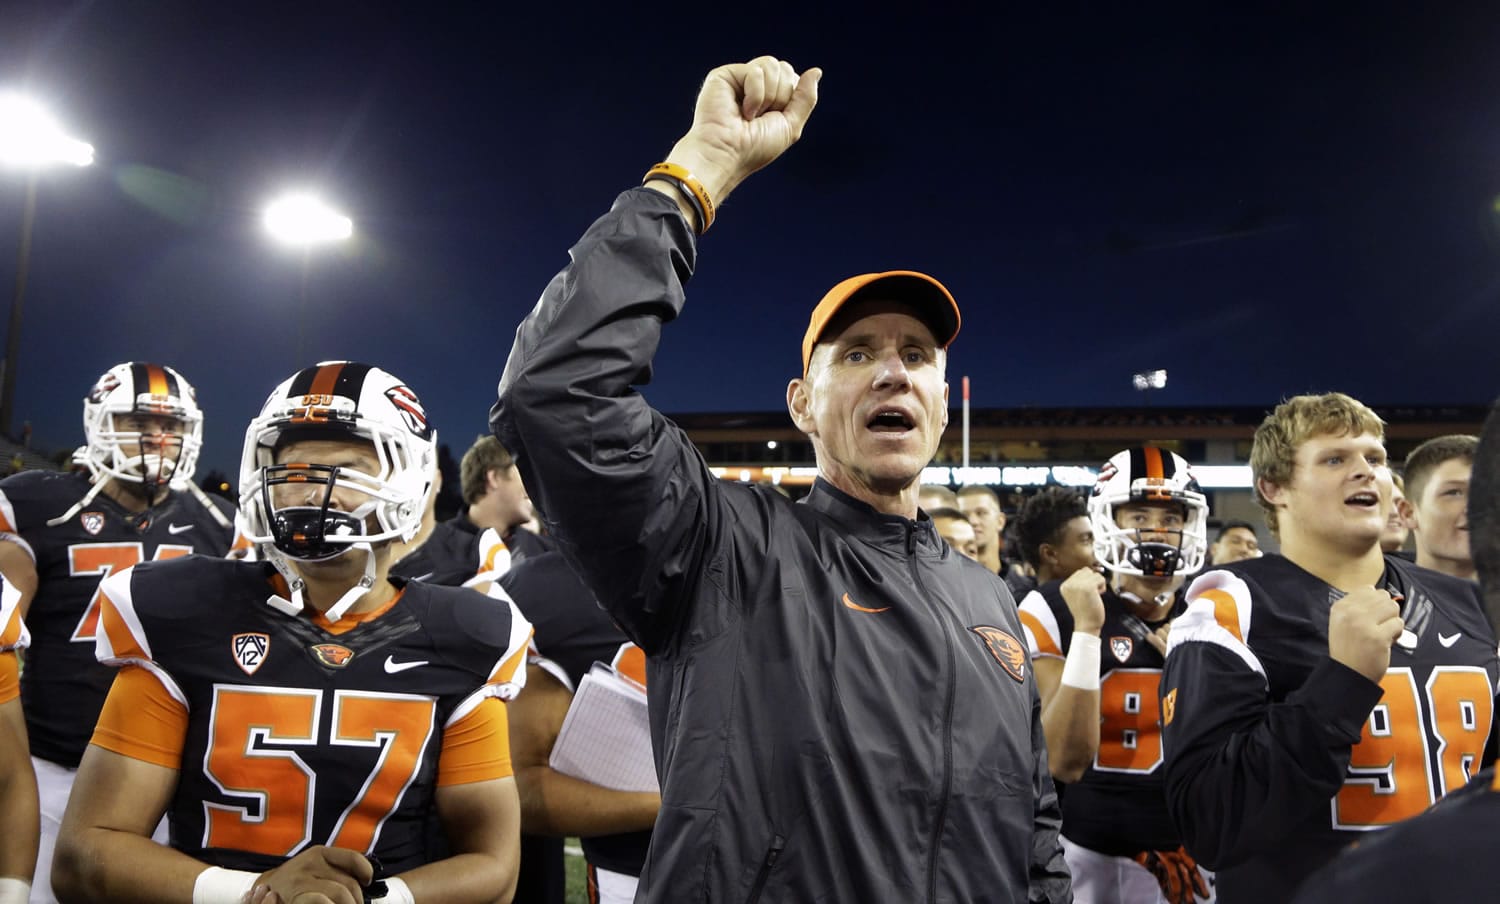 FILE - In this Friday, Sept. 4, 2015 file photo, Oregon State football coach Gary Anderson celebrates a  26-7 win over Weber State after an NCAA college football game in Corvallis, Ore.  With a young team, a true freshman quarterback, and a new scheme on both offense and defense, the first-year Oregon State coach had figured there would be growing pains.